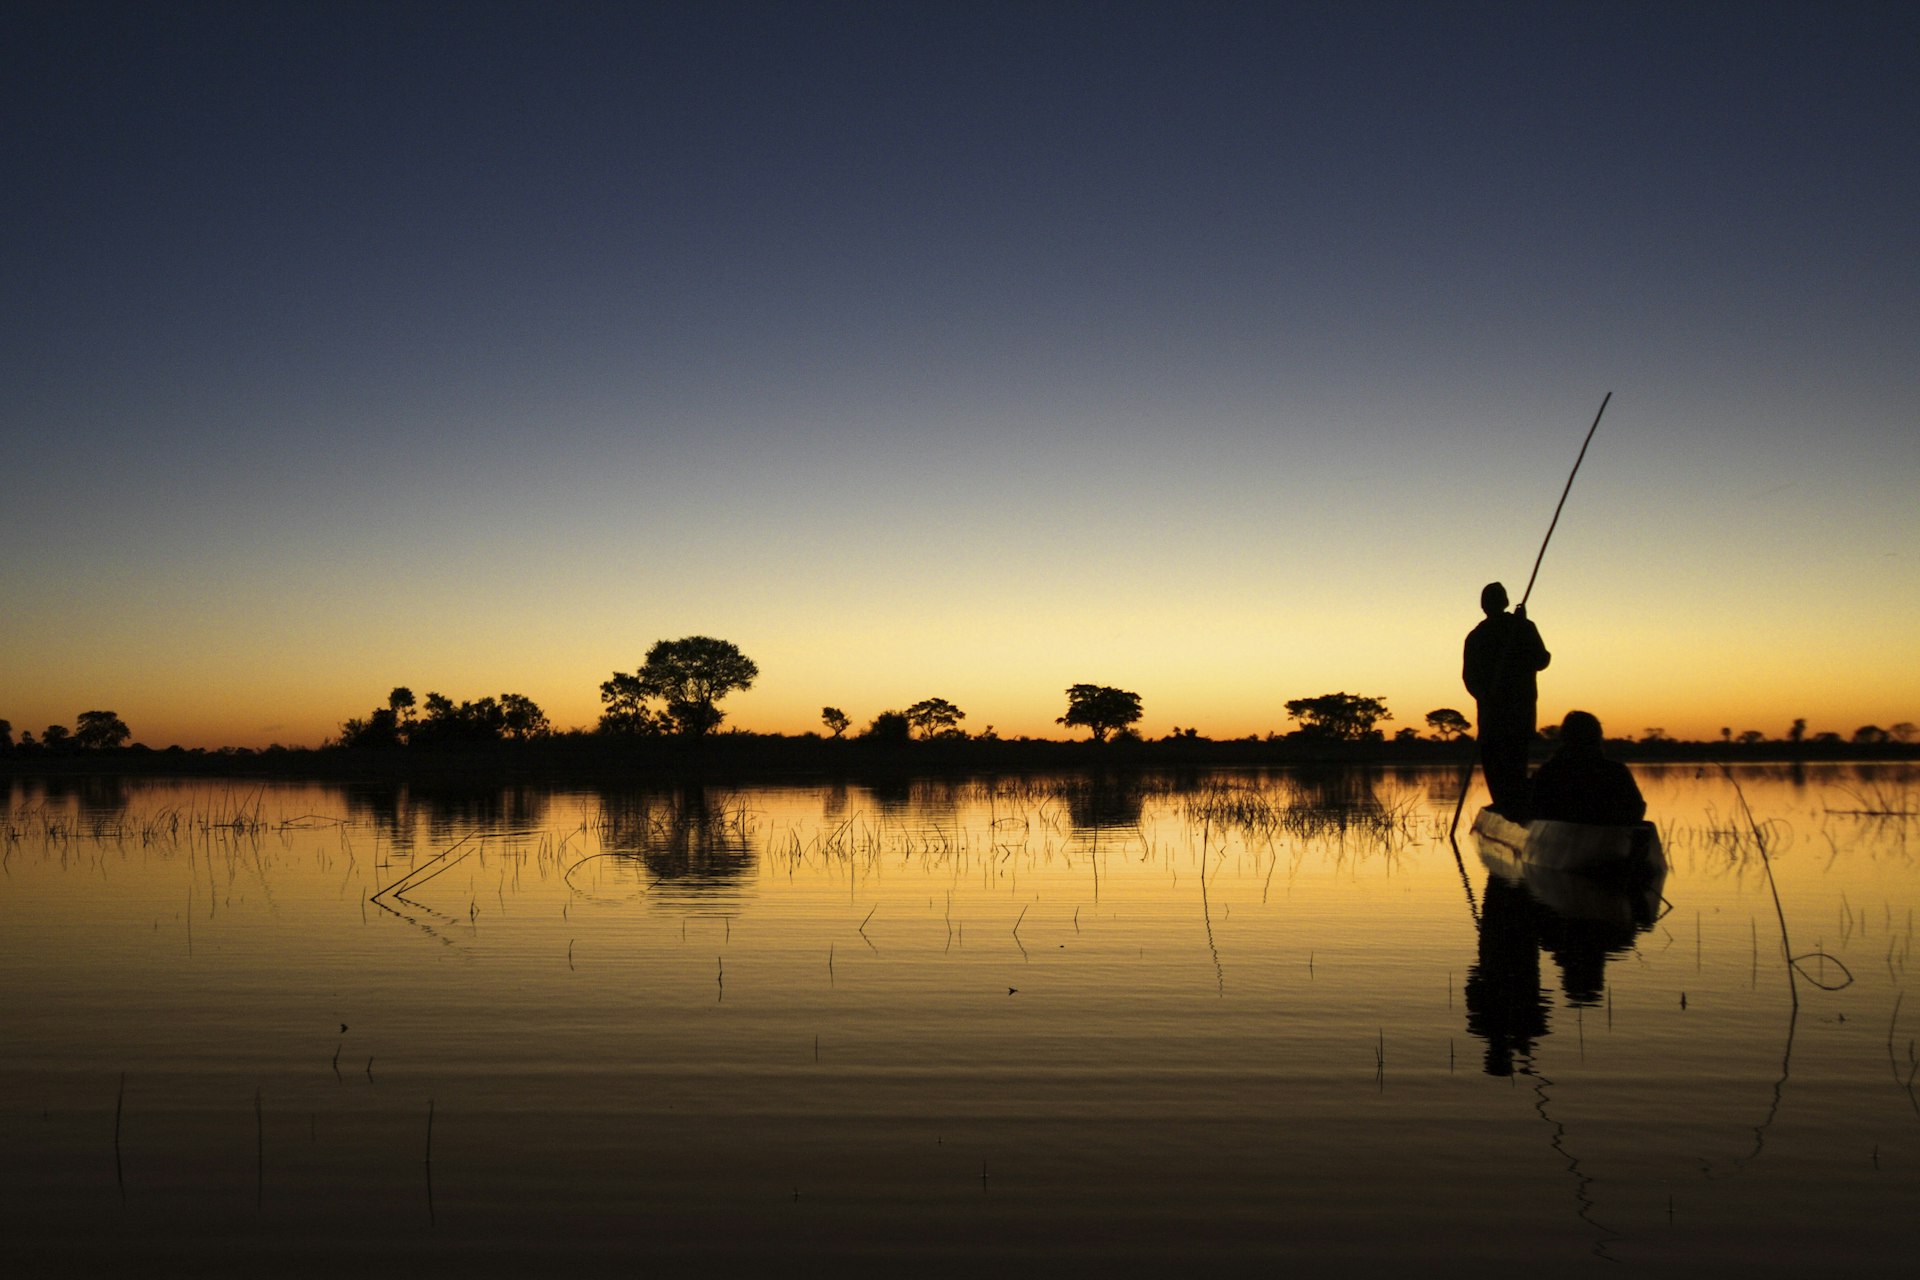 A canoe is silhouetted at dusk floating on Okavango Delta waters in Botswana